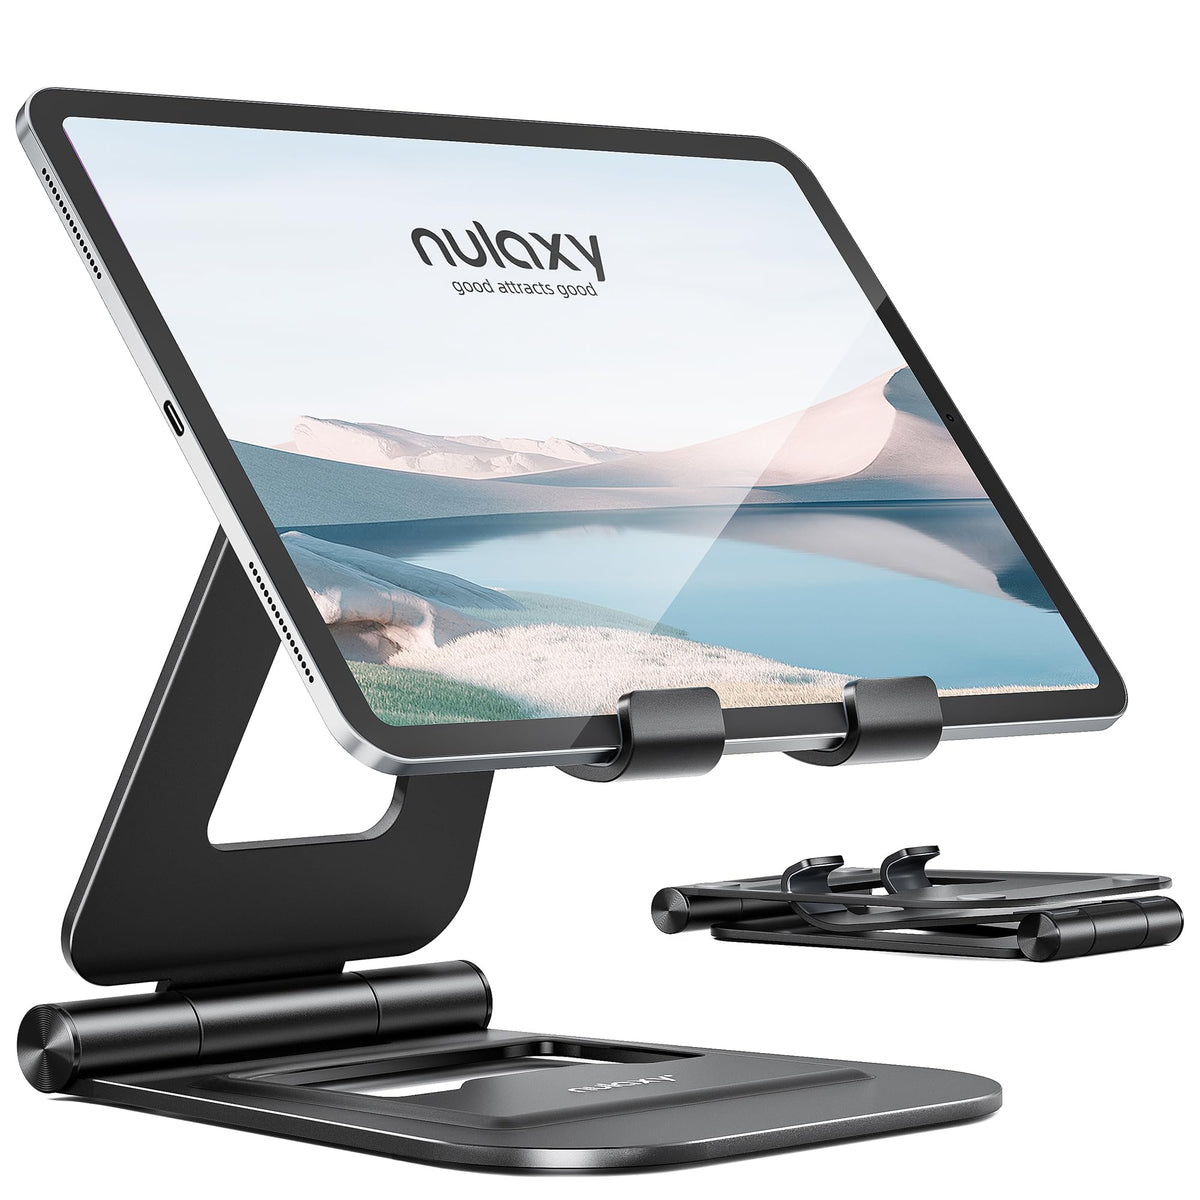 Nulaxy Dual Foldable iPad Stand, Fully Adjustable Desktop Tablet Holder, iPad Accessories for Office Kindle Compatible with 4-11" Mobile Devices iPad Pro/Air/Mini, iPhone Pro/Max/Plus, Nexus, Black